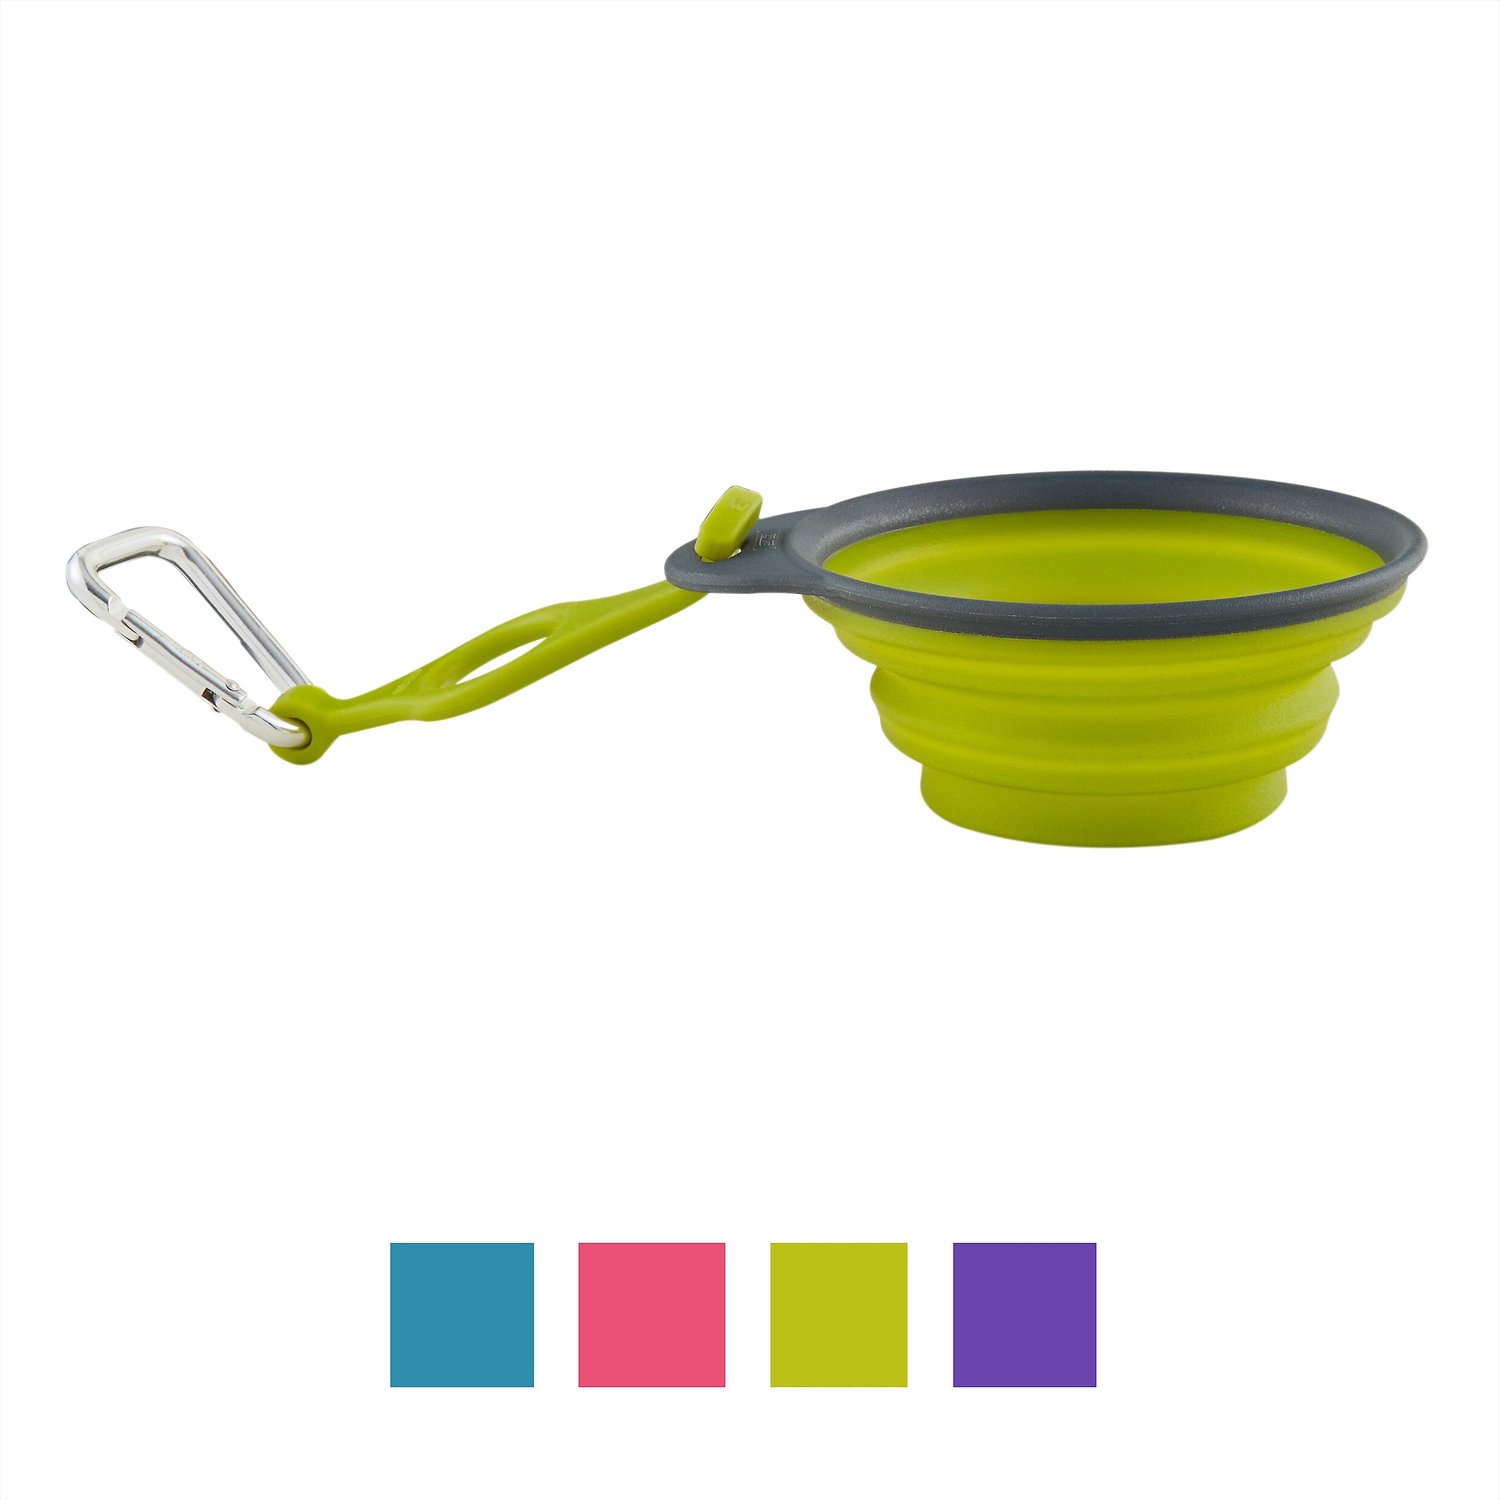 DEXAS Popware Collapsible TRAVEL CUP Food Water Pet Bowl Dish with Clip Bottle